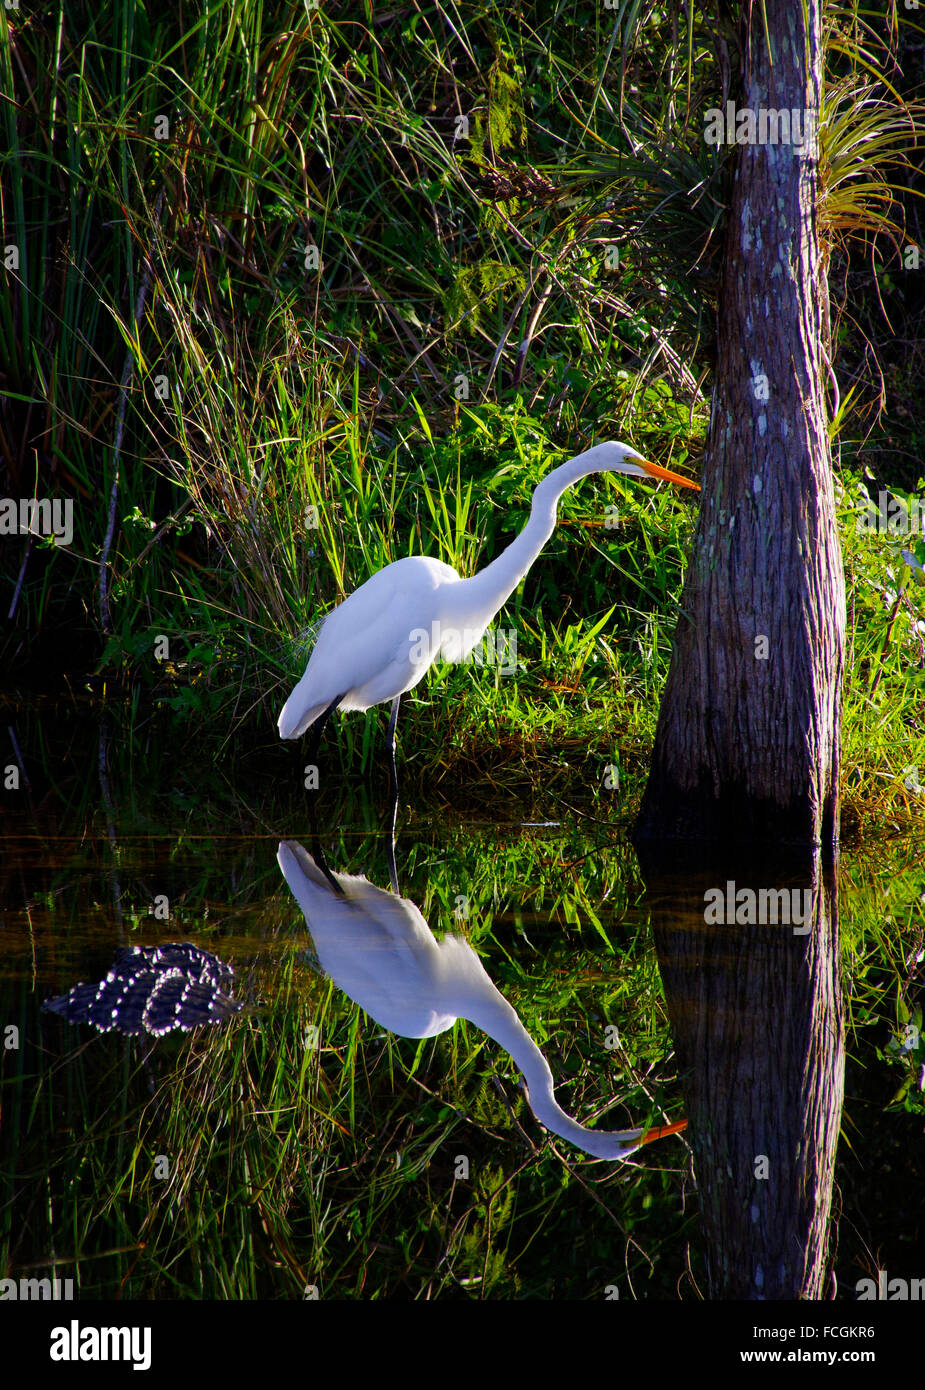 Egret in Big Cypress Swamp Preserve being hunted by Alligator Stock Photo